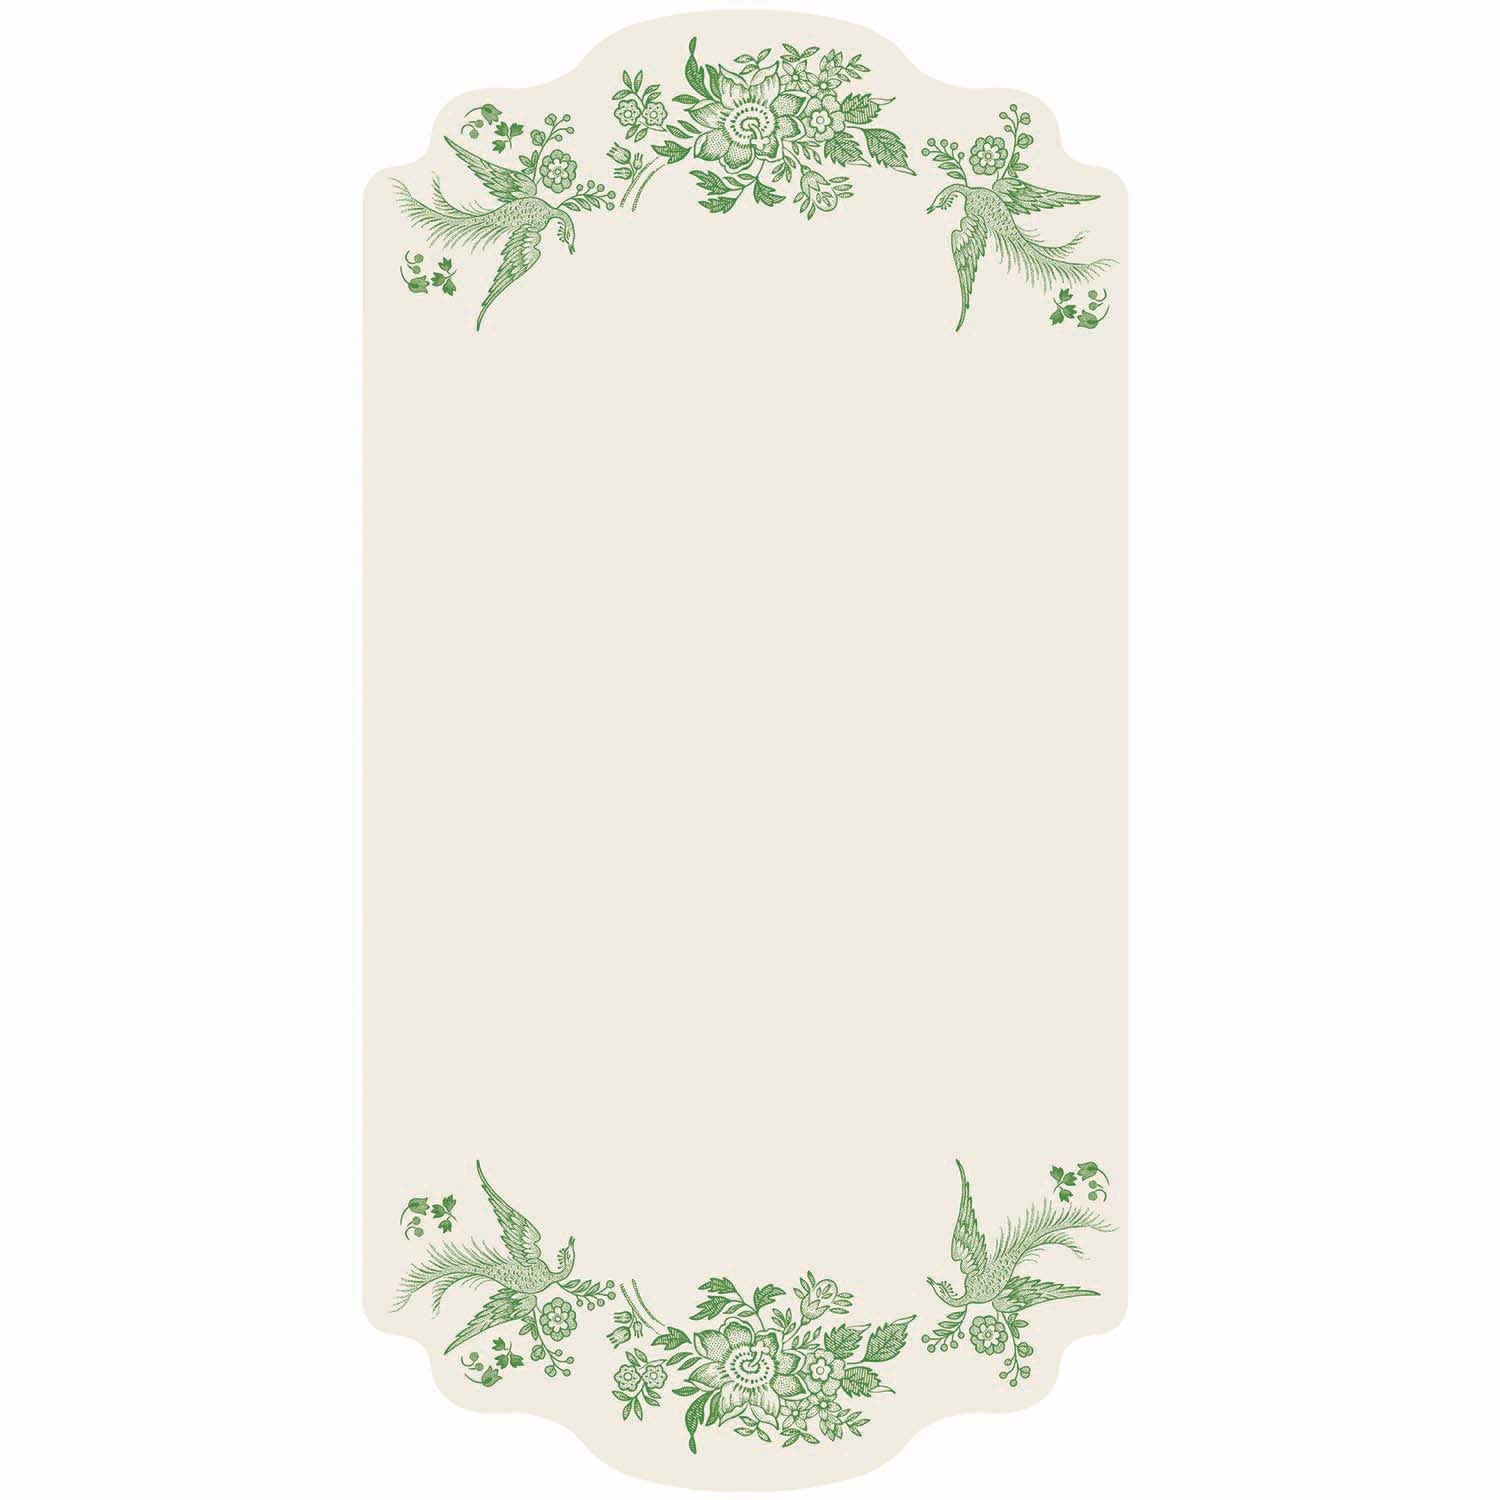 A white rectangular die-cut card featuring a green vintage Burleigh-style floral and bird design along the top and bottom edges.